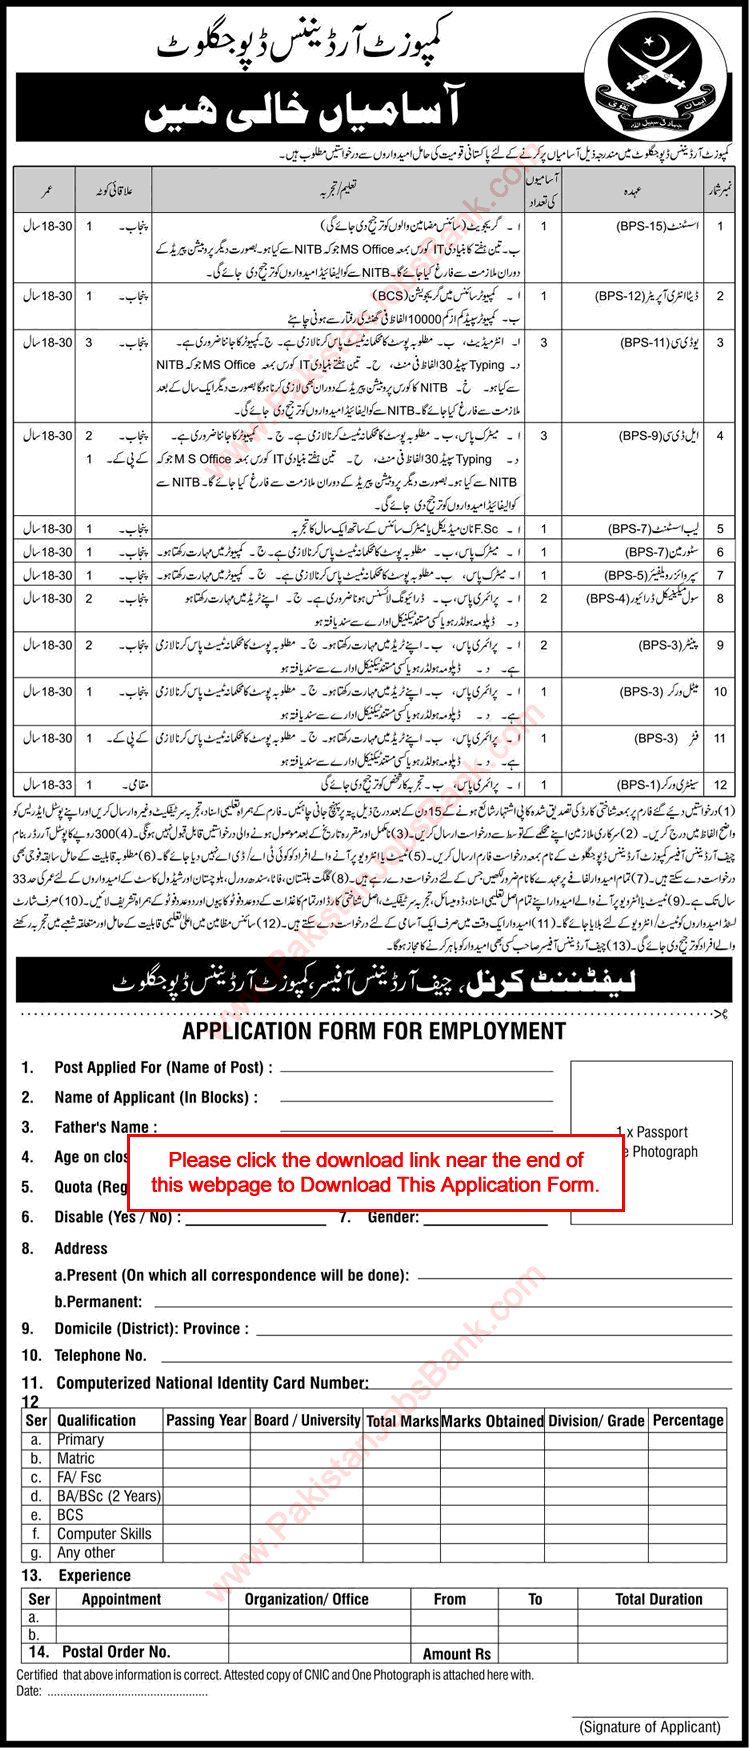 Composite Ordnance Depot Jaglot Jobs 2018 May Application Form Clerks, Drivers & Others Pakistan Army Latest